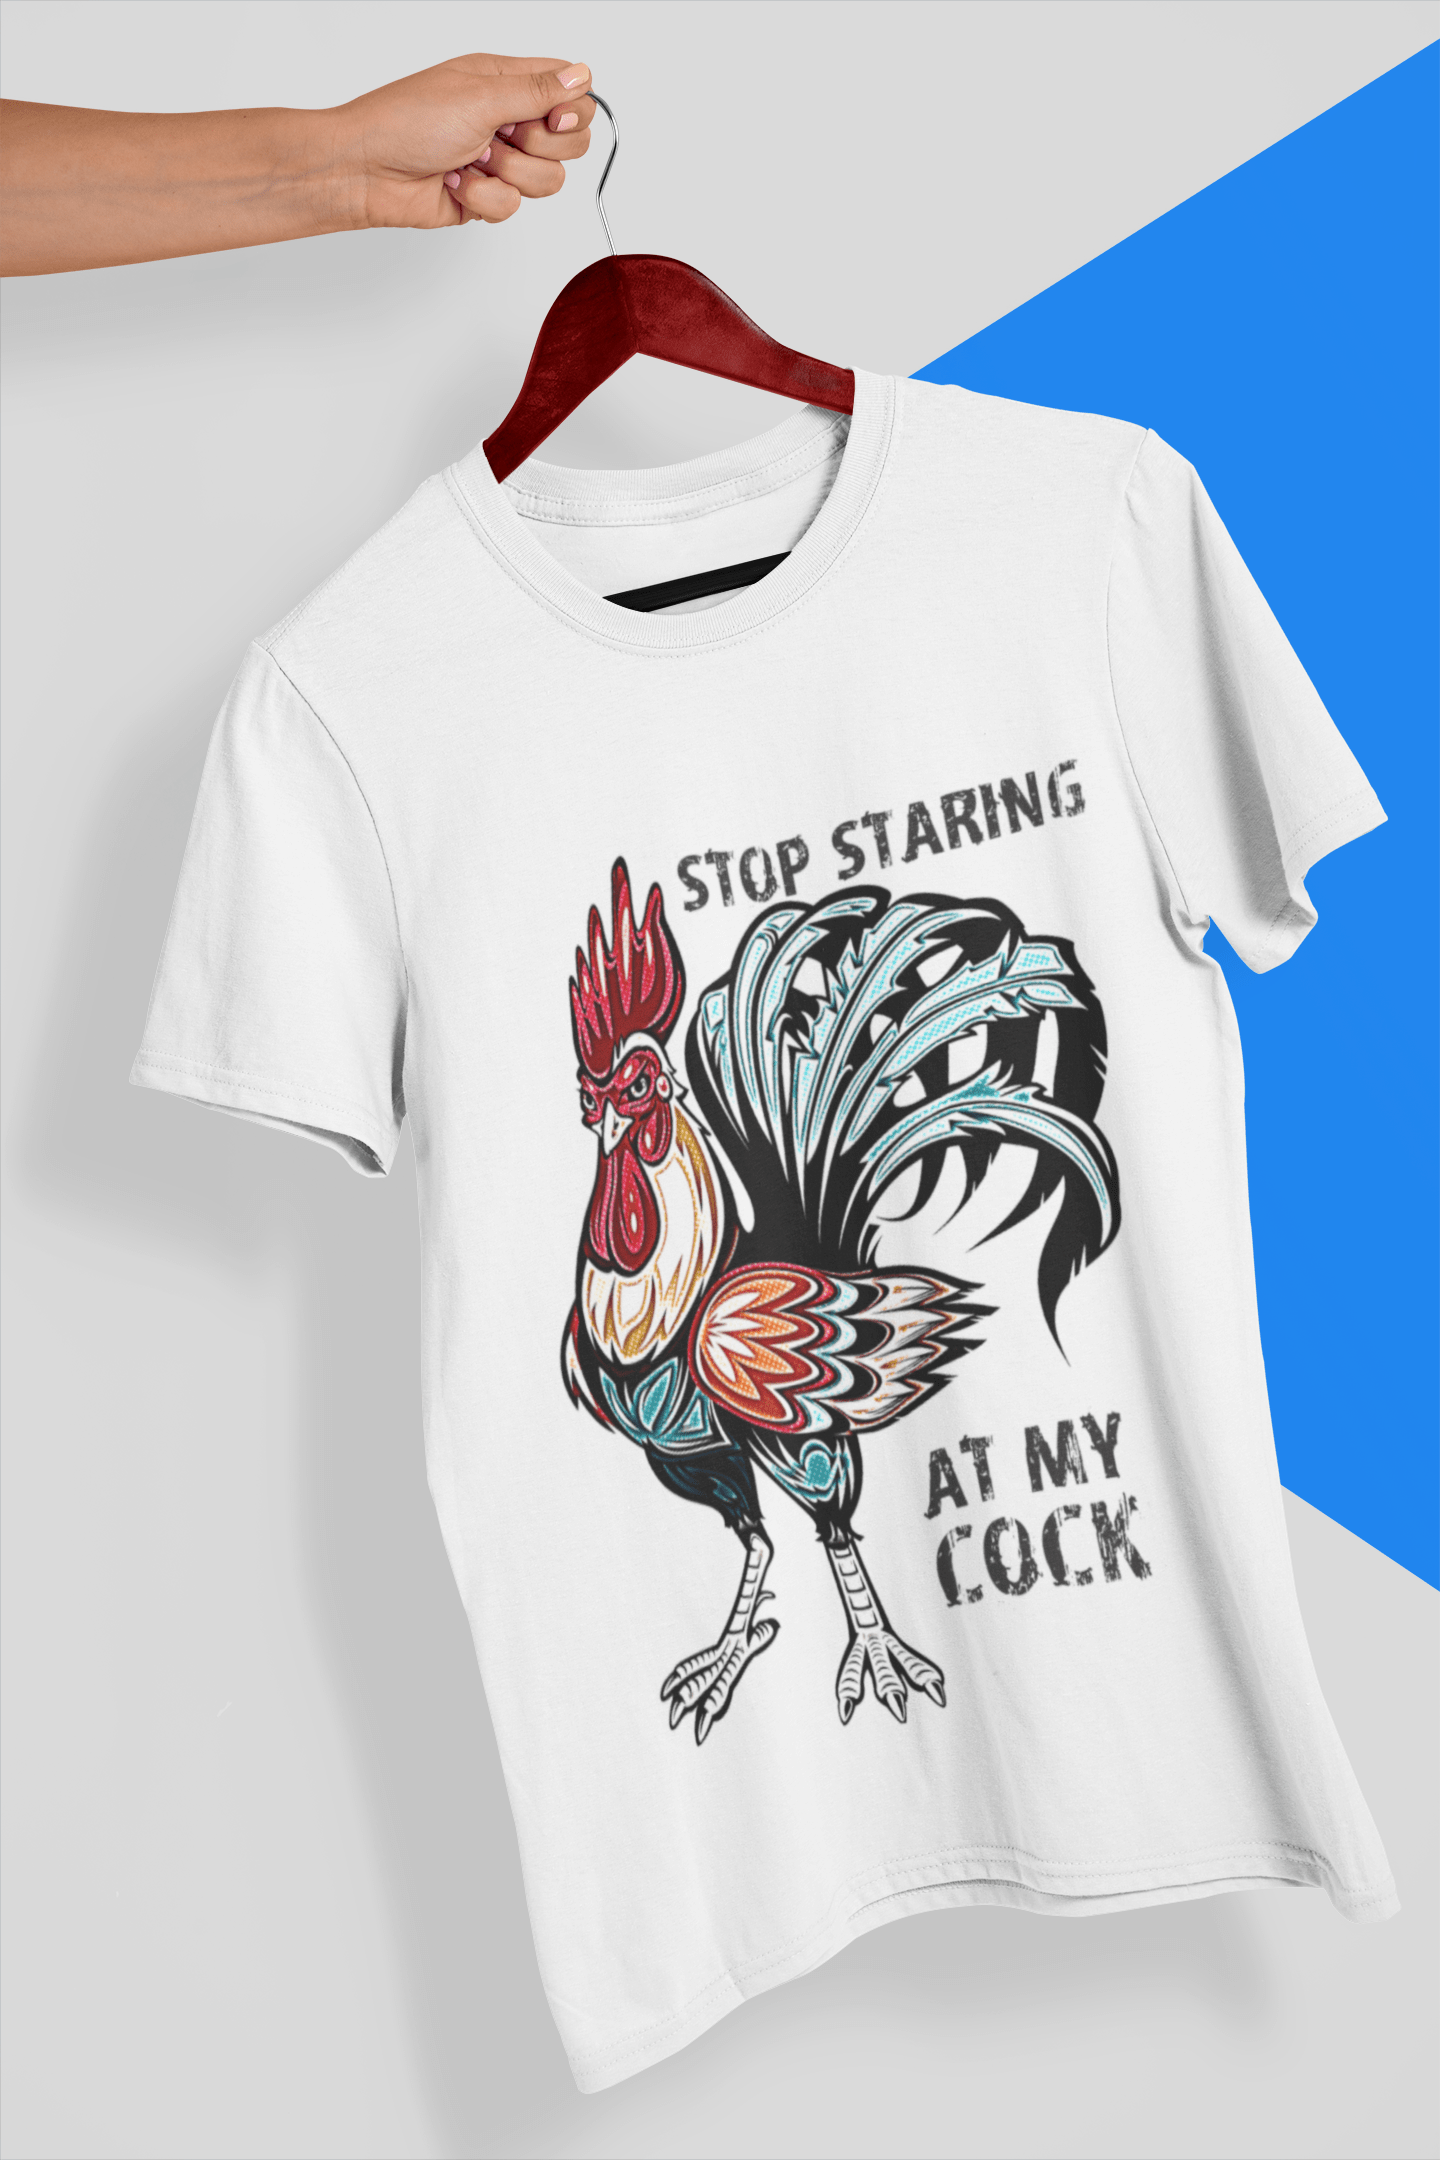 Stop Looking at my Cock - Funny T-Shirt